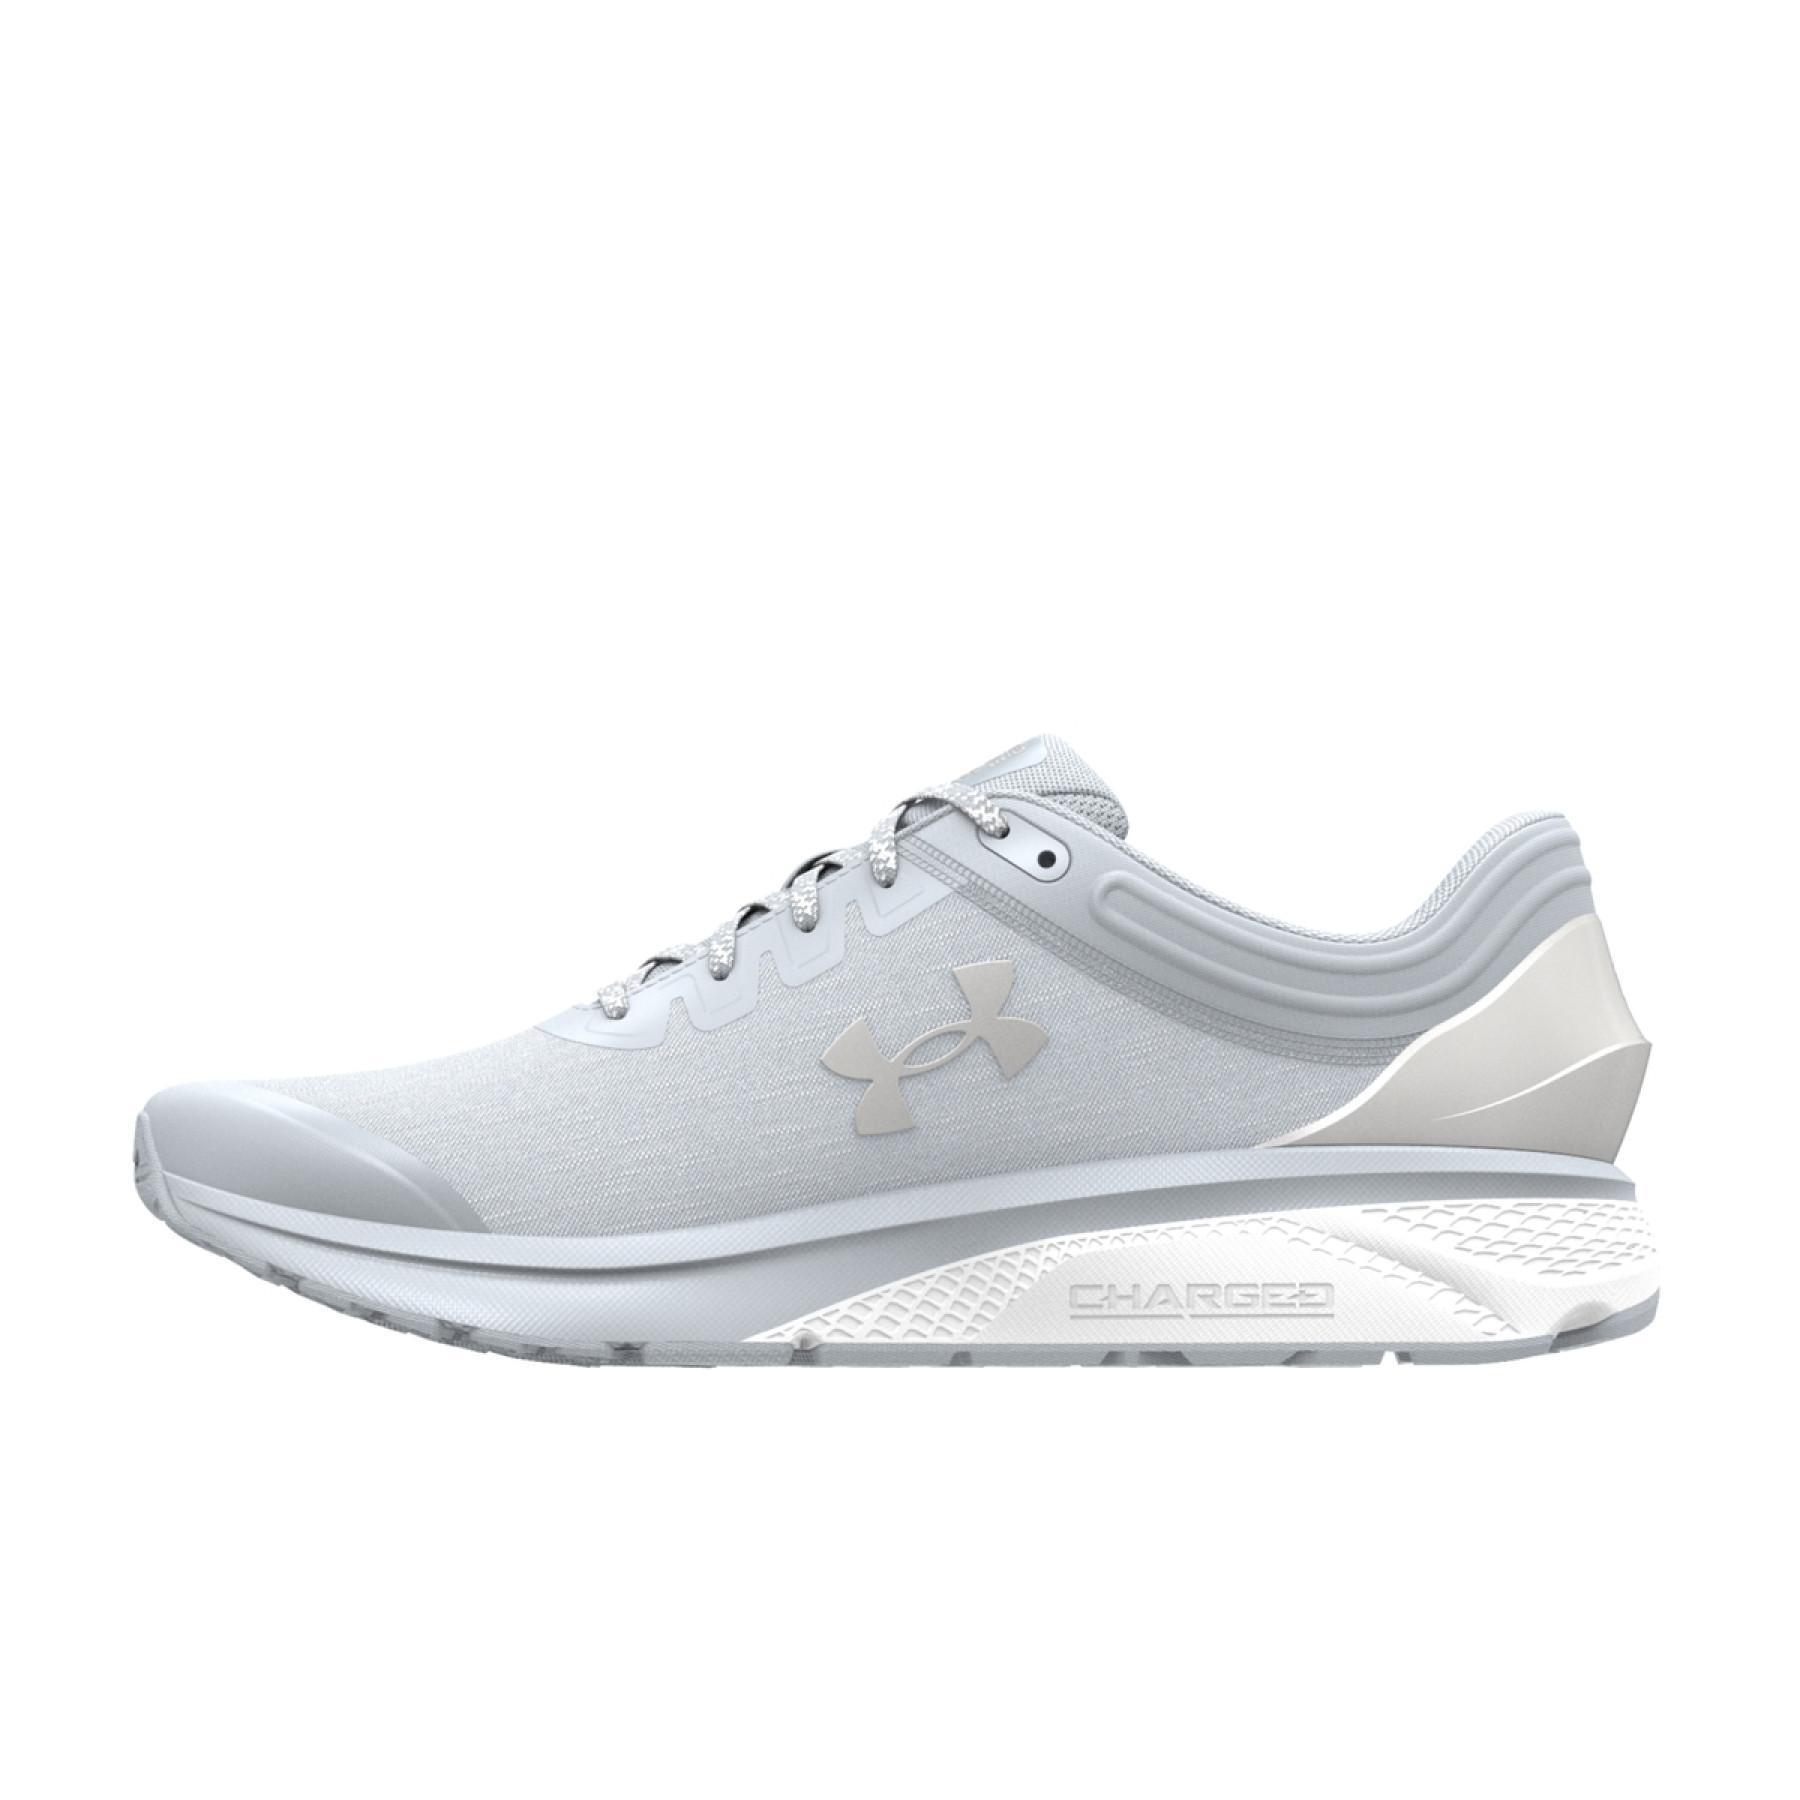 Zapatillas de running para mujer Under Armour Charged Escape 3 EVO Charm